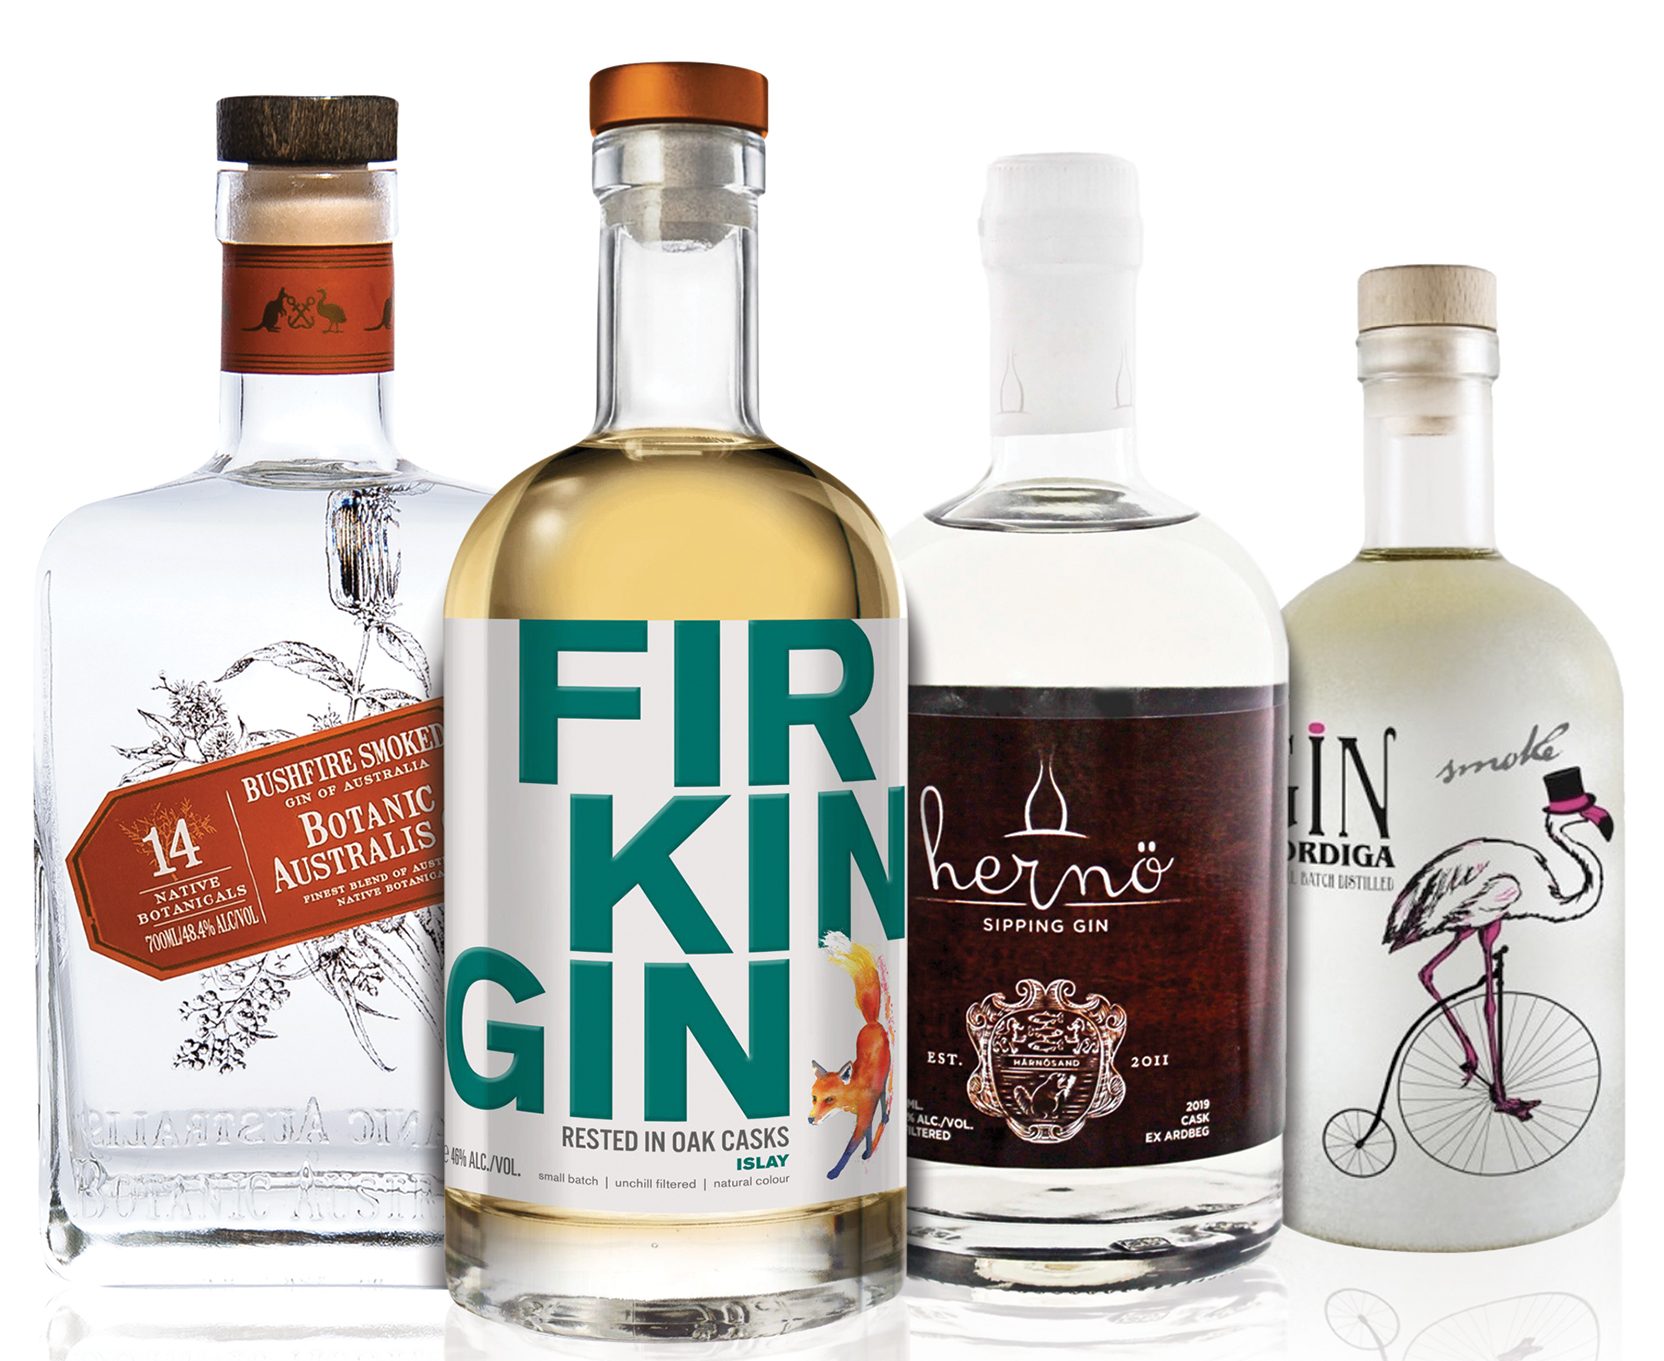 Smoky gins from Mt Uncle Distillery, Firkin, Hernö and Gin Bordiga